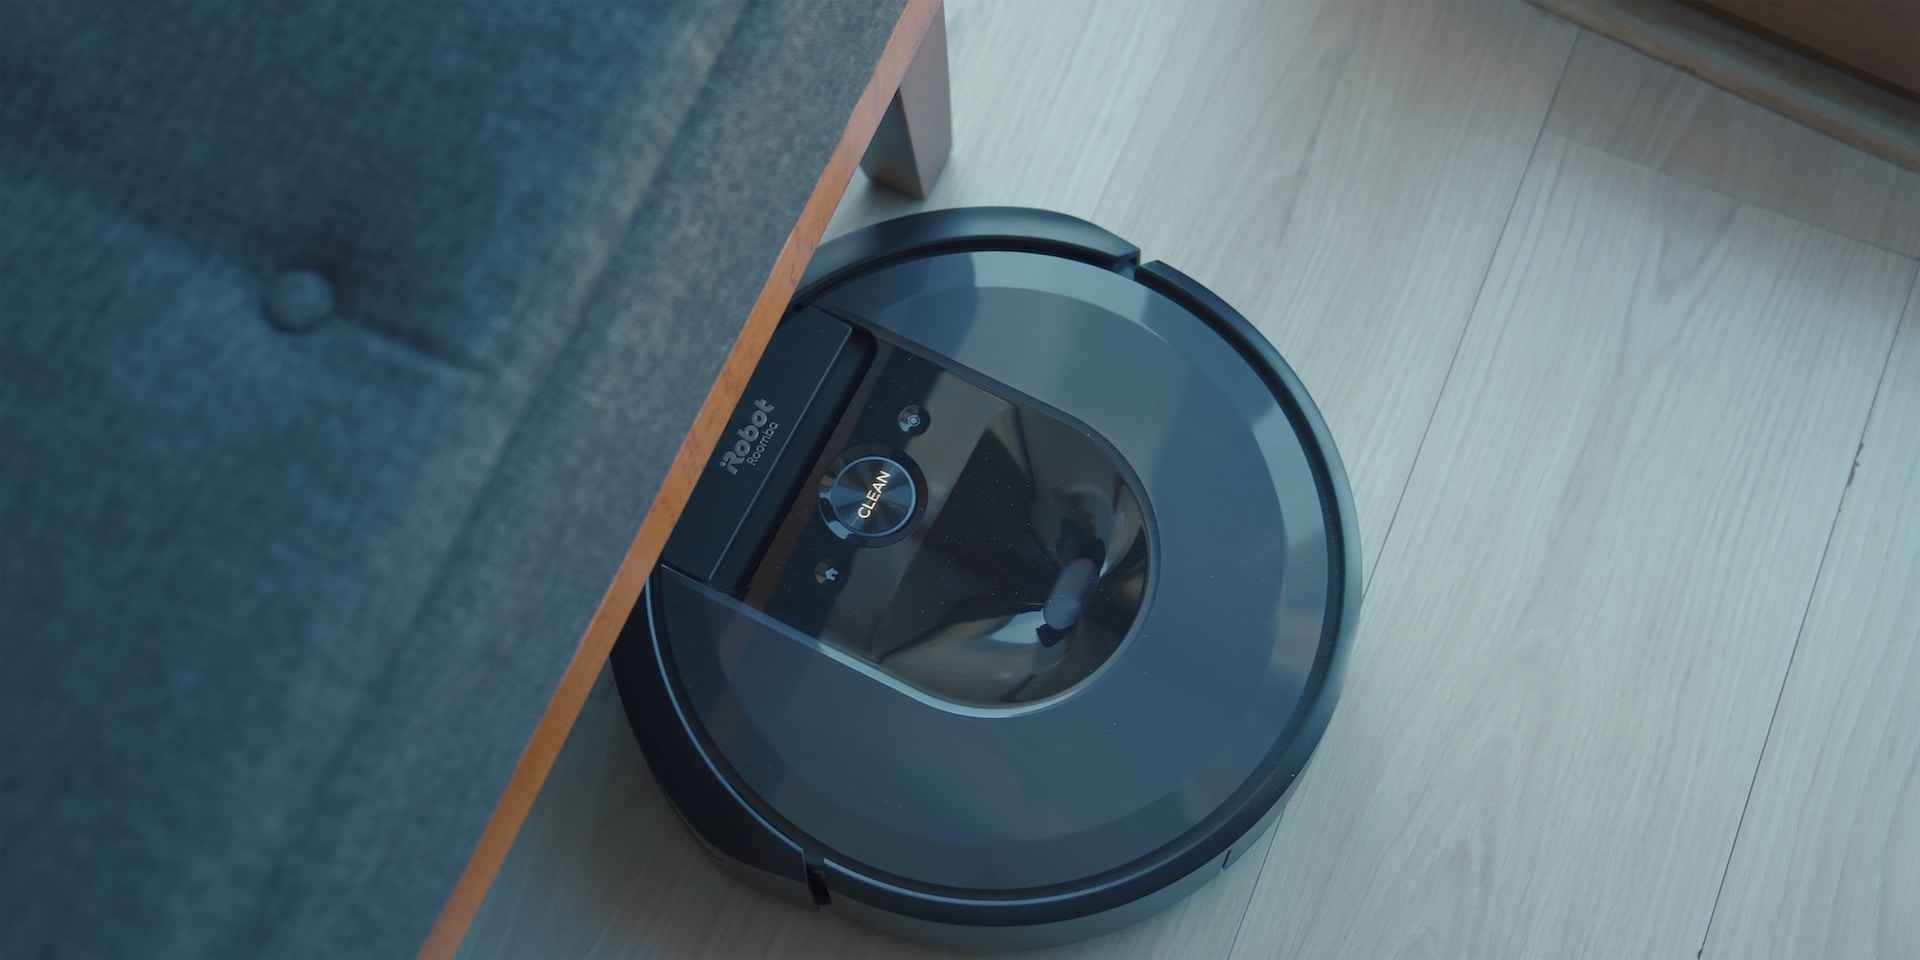 Key Factors To Consider Before Buying a Robot Vacuum Cleaner